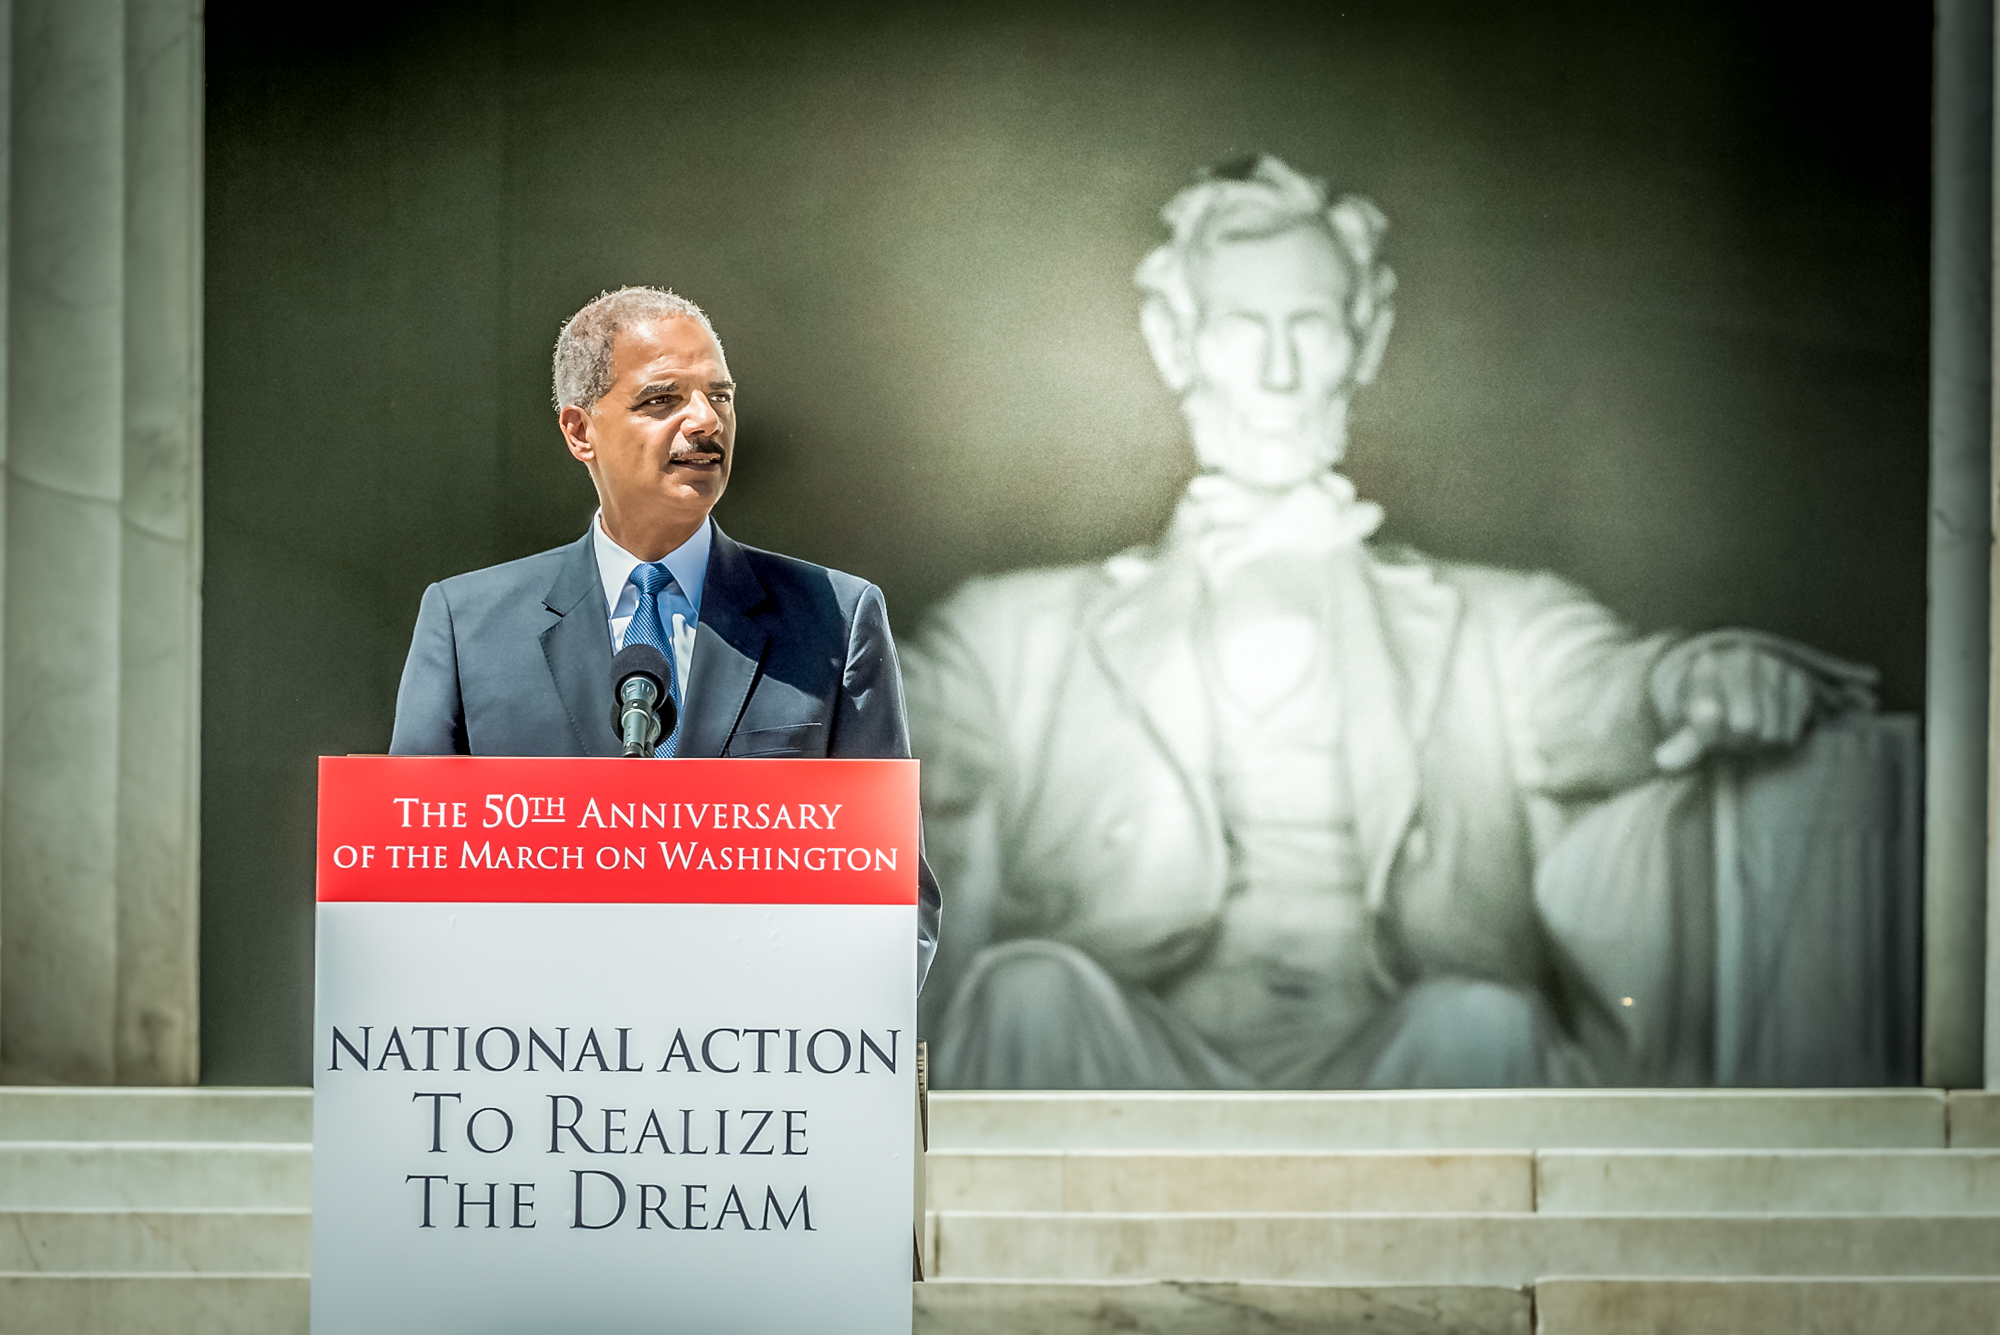 Attorney General Eric Holder speaks at the National Action to Realize the Dream March